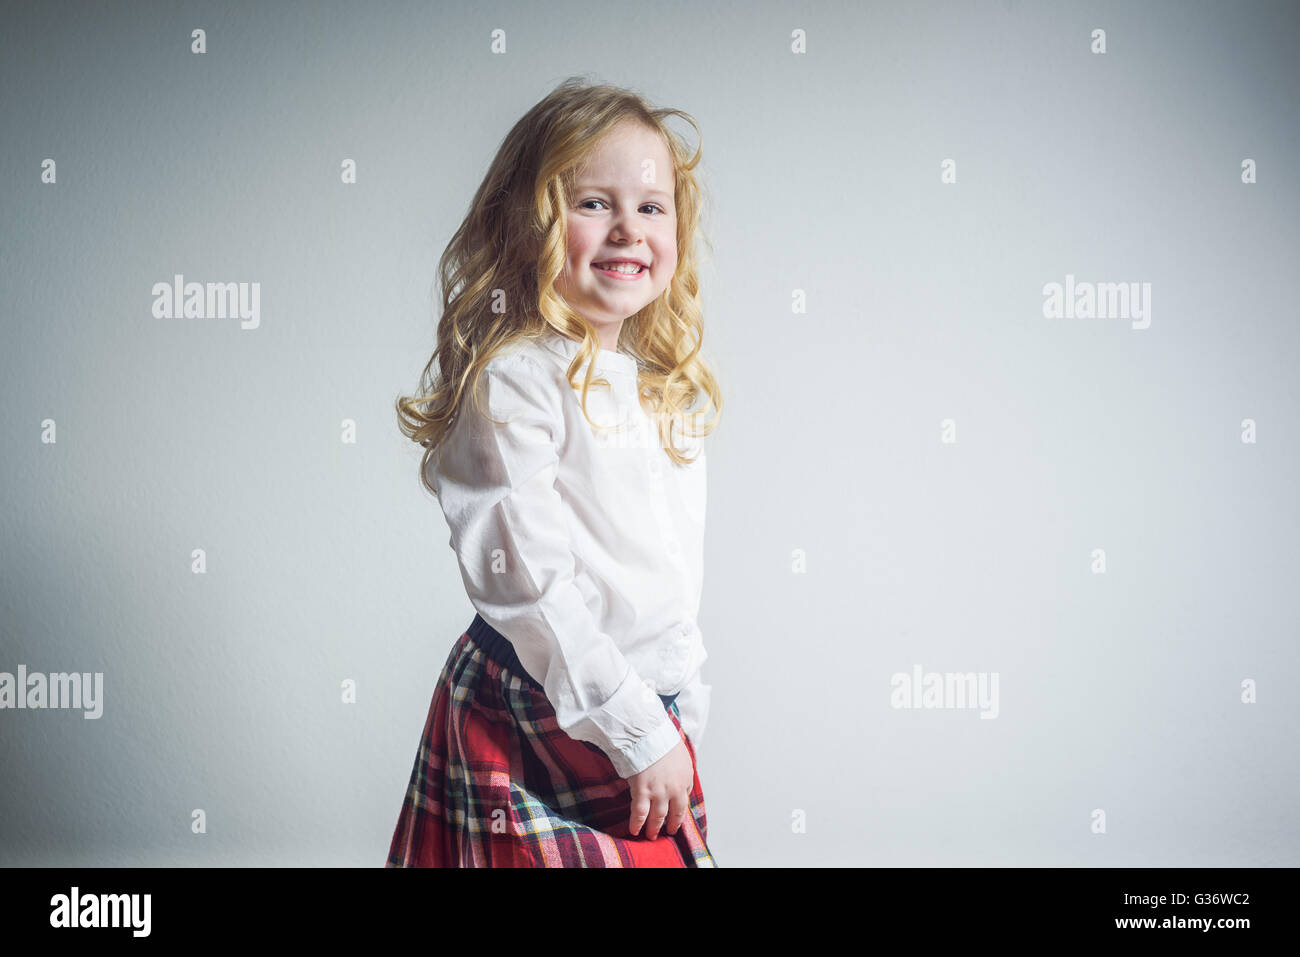 Beautiful smiling blond girl in a school uniform Stock Photo